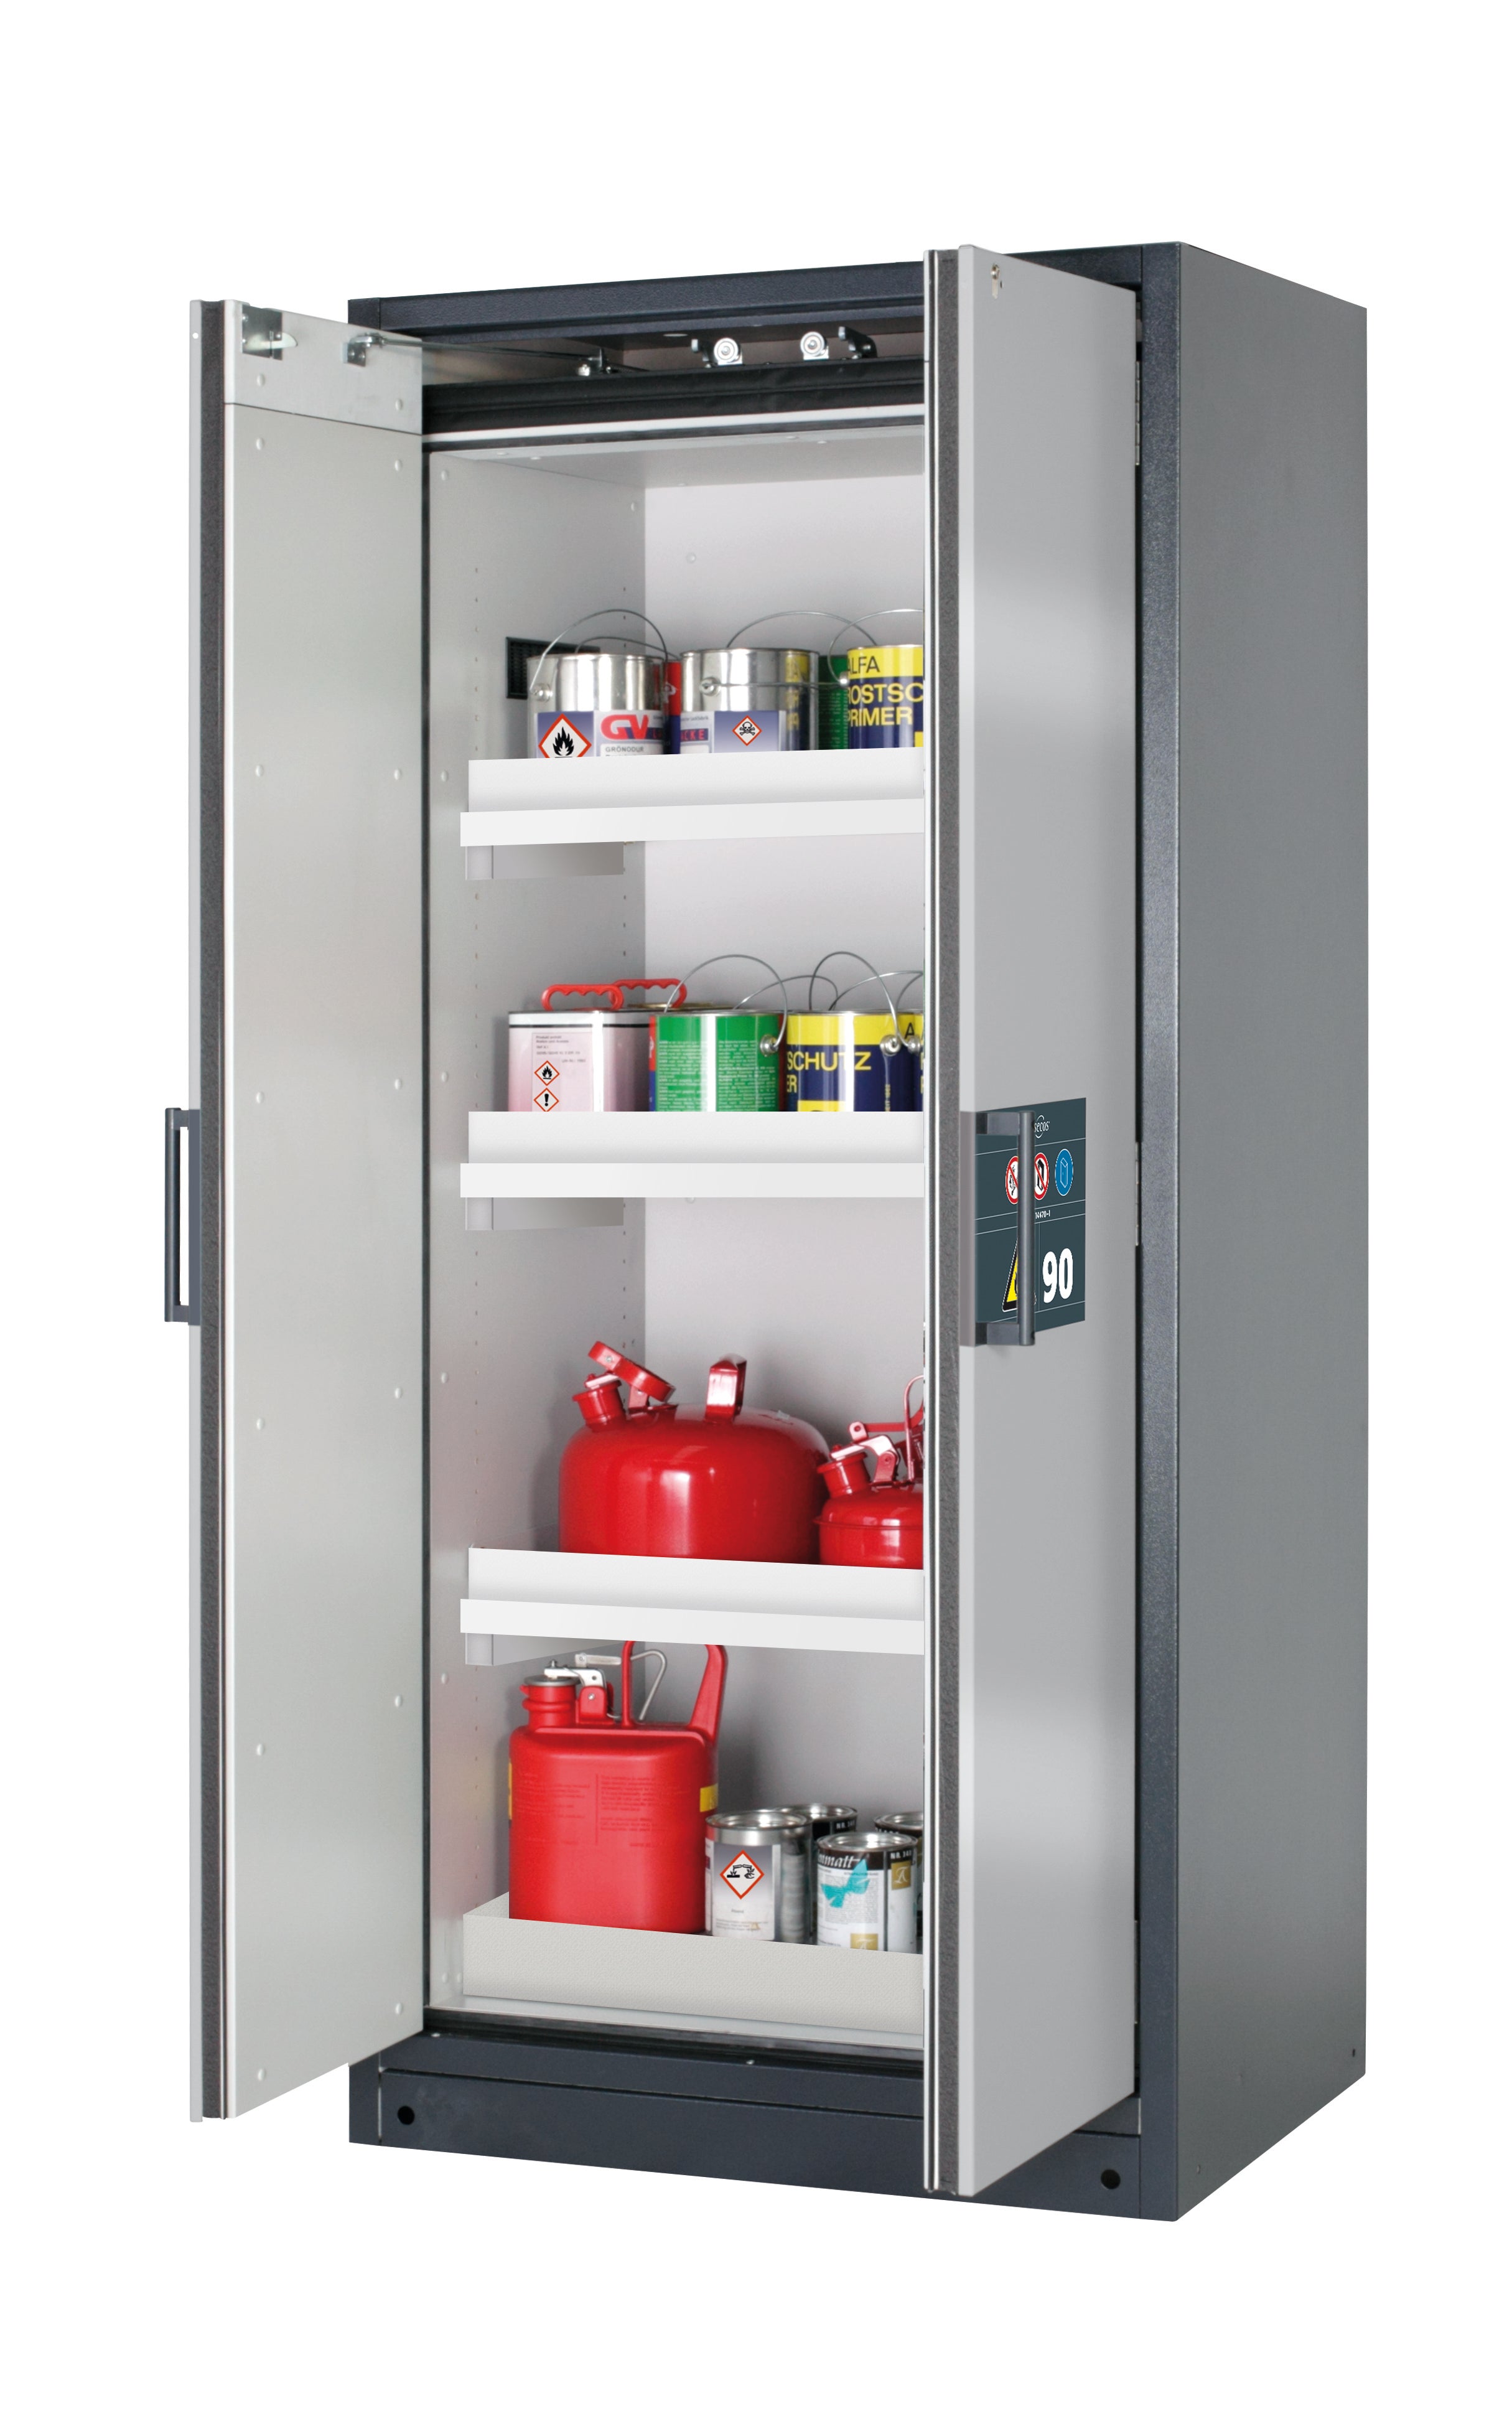 Type 90 safety storage cabinet Q-CLASSIC-90 model Q90.195.090 in asecos silver with 3x tray shelf (standard) (polypropylene),